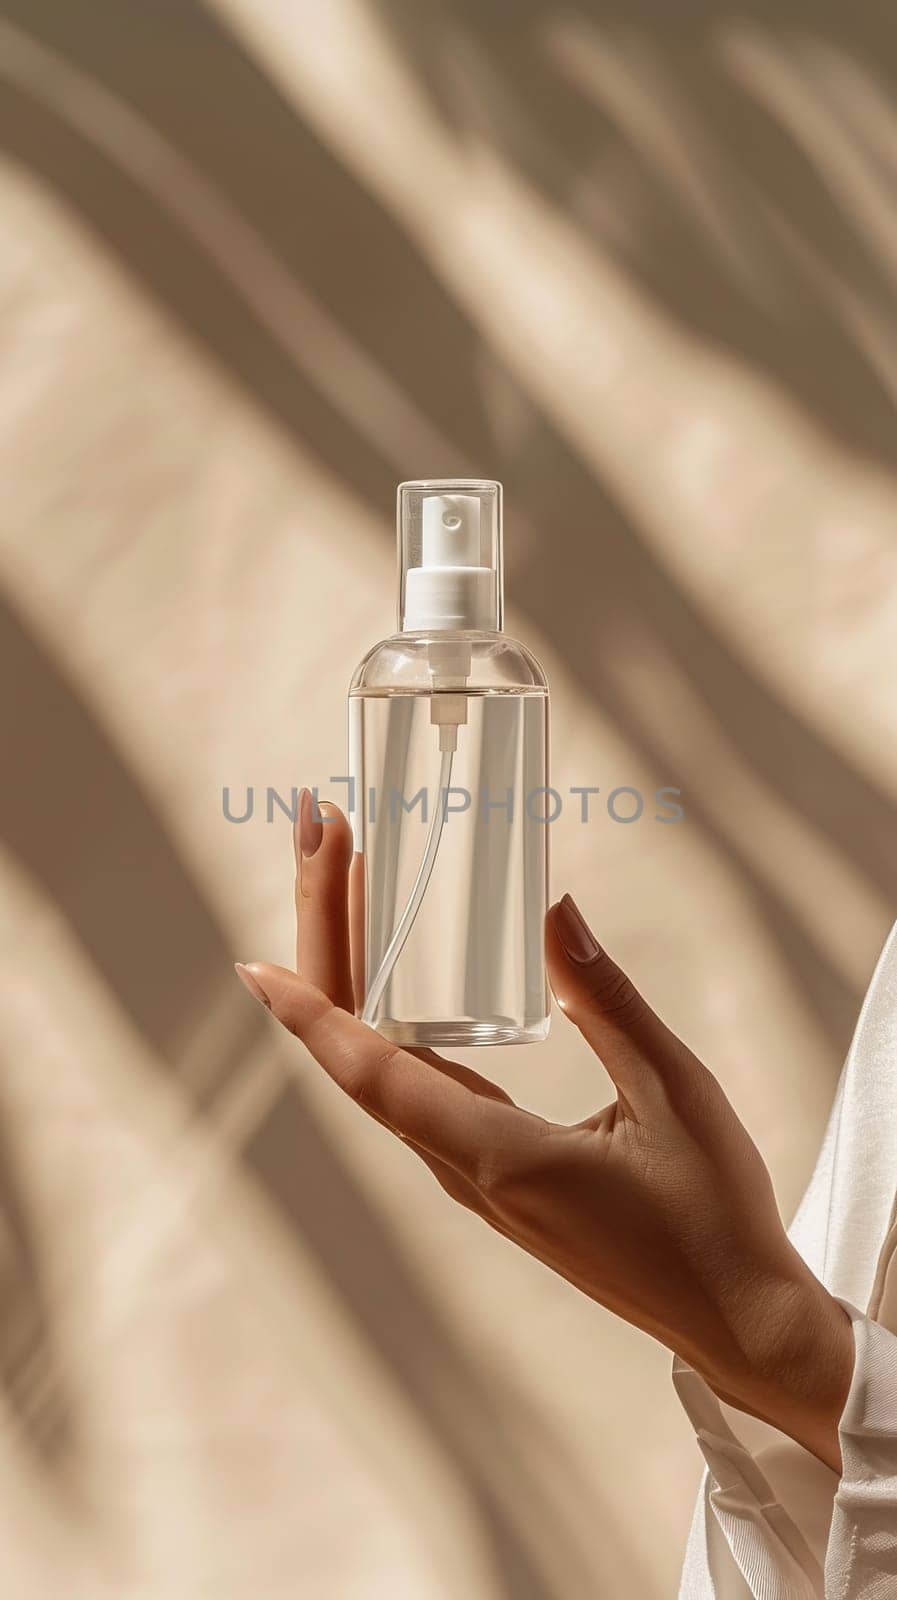 A person is holding a bottle of lotion in their hand. The bottle is made of clear plastic and is filled with a clear liquid